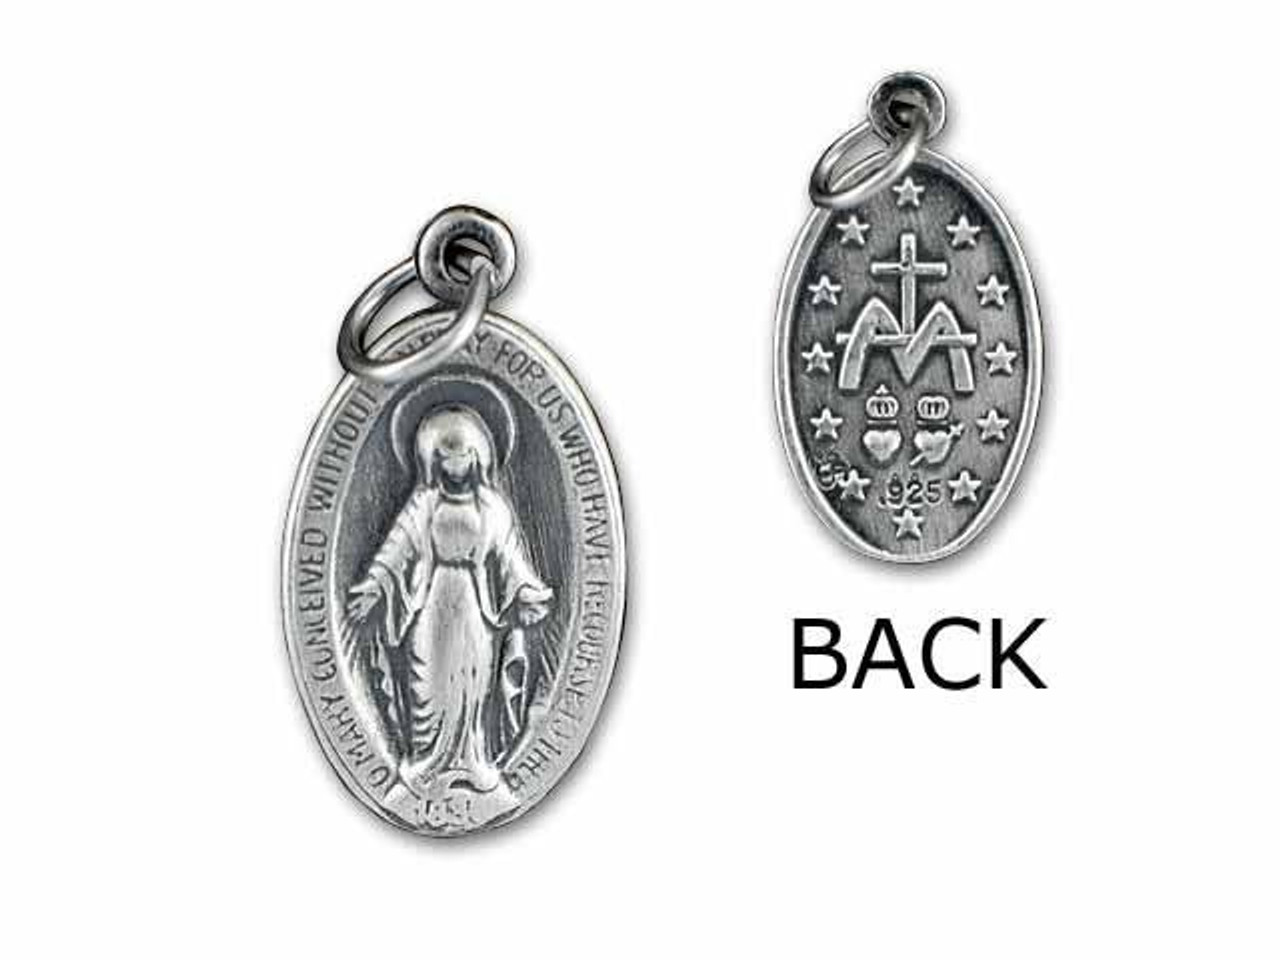 18 to 24 US Jewels And Gems New 0.925 Sterling Silver 1 Oval Miraculous Virgin Mary Antique Finish Pendant Necklace 